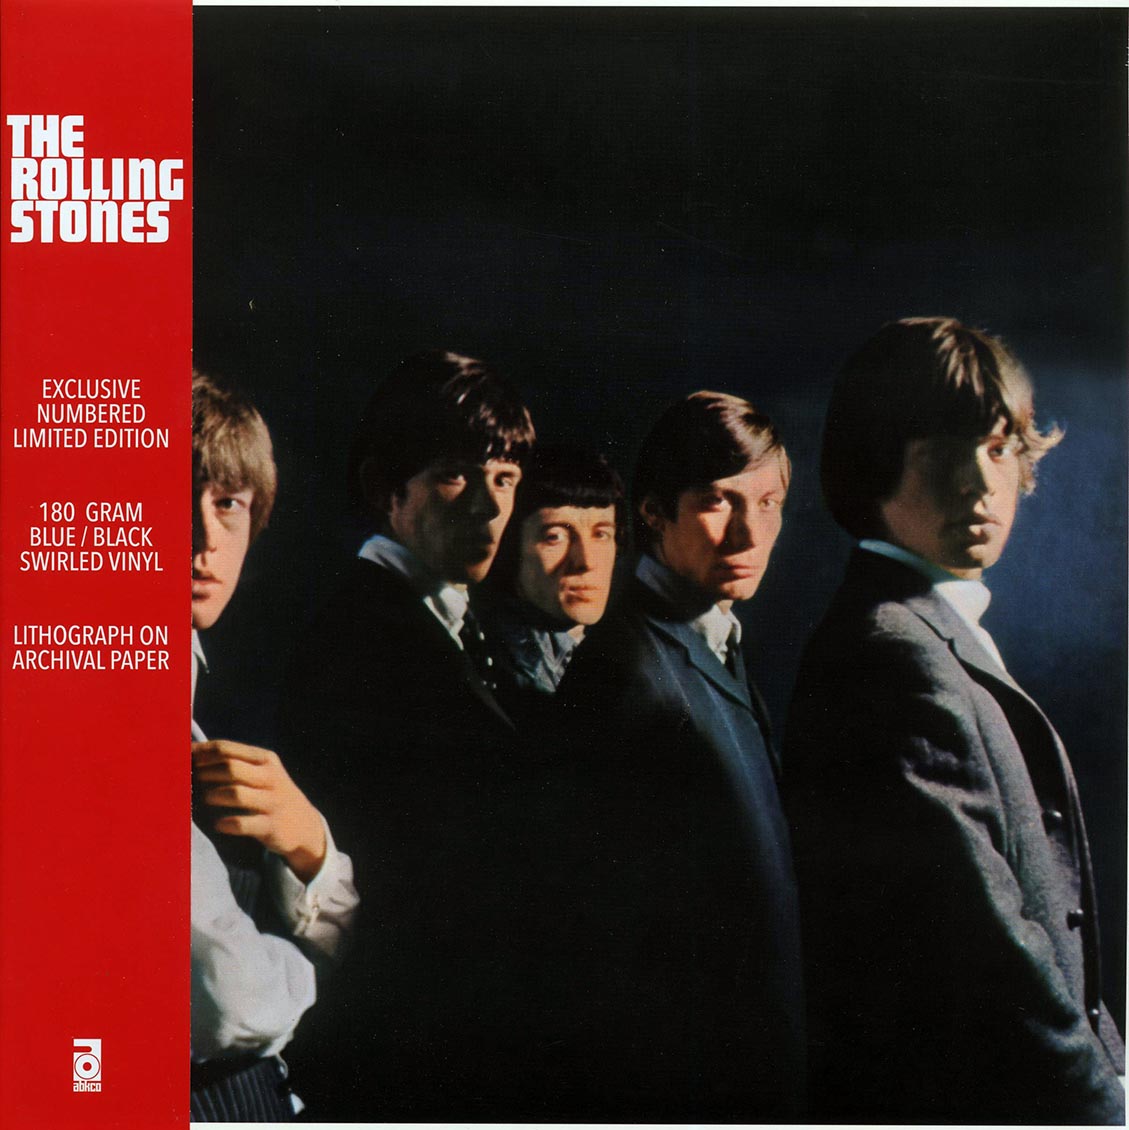 The Rolling Stones - The Rolling Stones (mono) (RSD 2024) (numbered ltd.ed.) (180g) (colored vinyl) - Vinyl LP